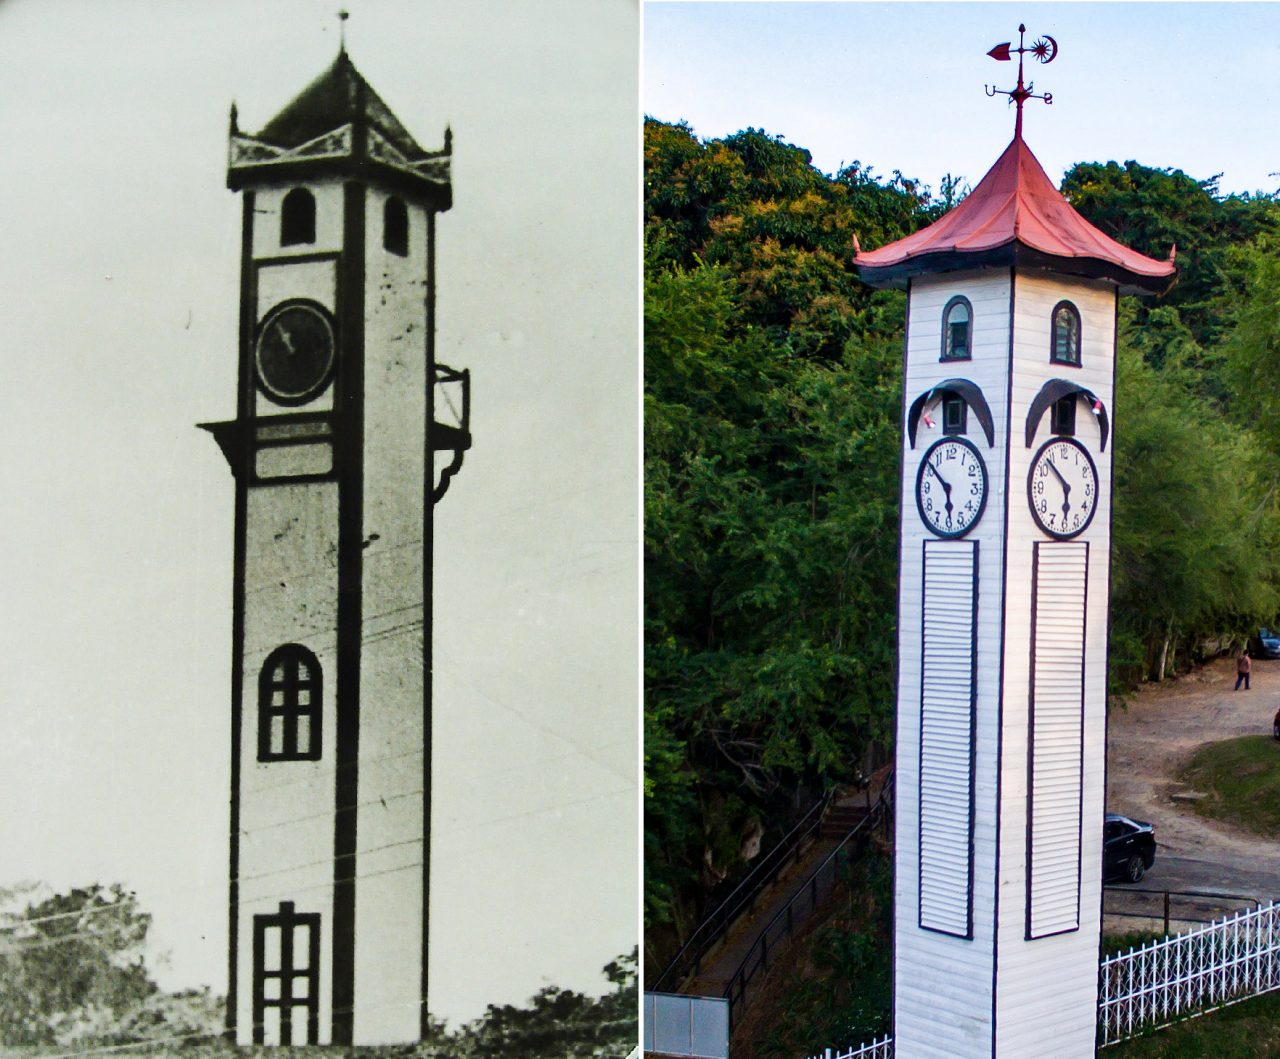 The old and new Look of Atkinson Clock Tower (1930 vs 1959)